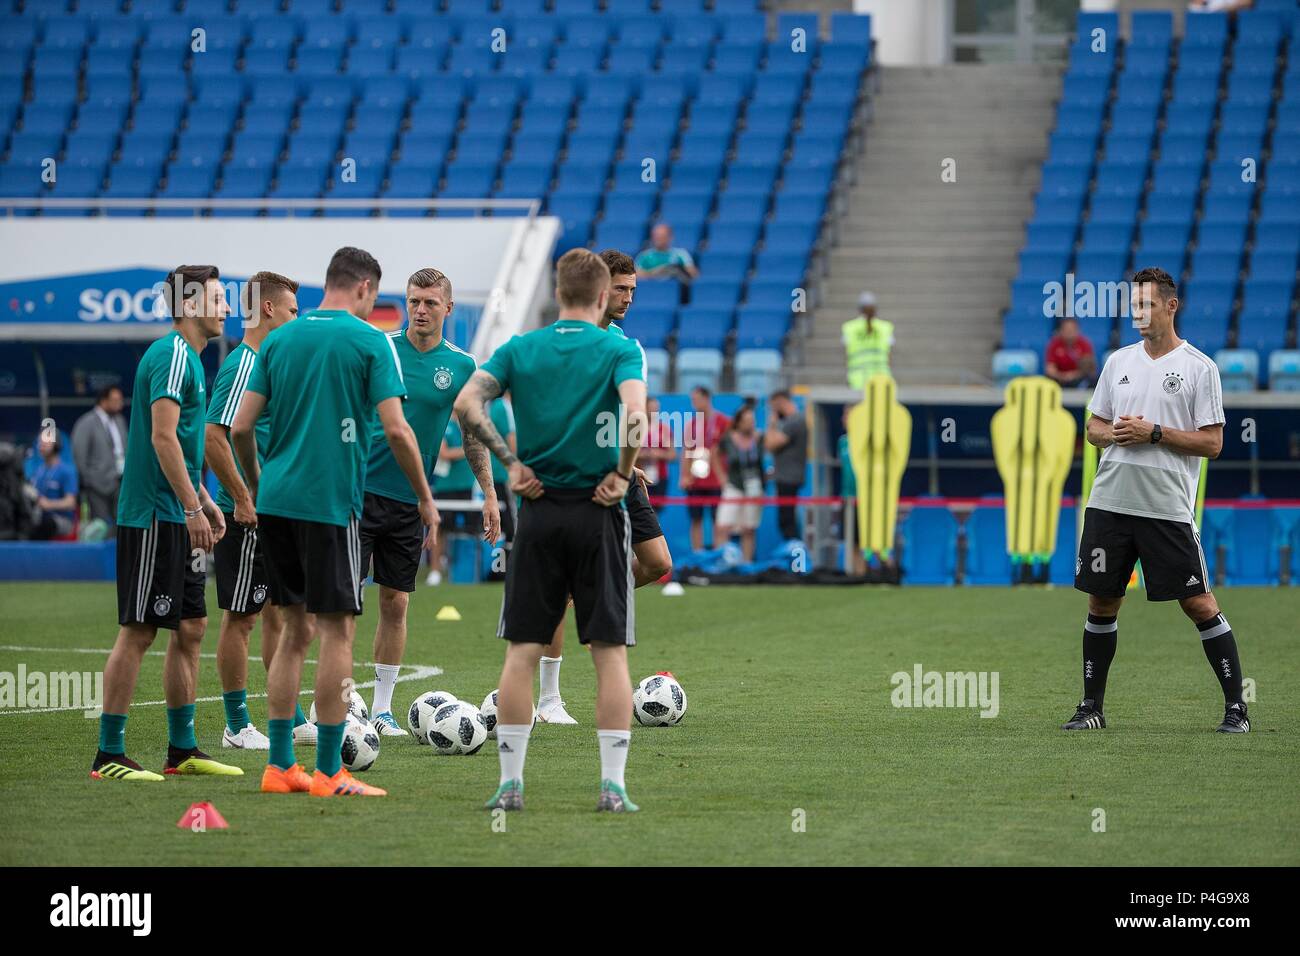 (180622) -- SOCHI, June 22, 2018 (Xinhua) -- Coaching assistant Miroslav Klose (1st R) of Germany attends a training session prior to the 2018 FIFA World Cup Group F match between Germany and Sweden in Sochi, Russia, on June 22, 2018. (Xinhua/Li Ming) Stock Photo